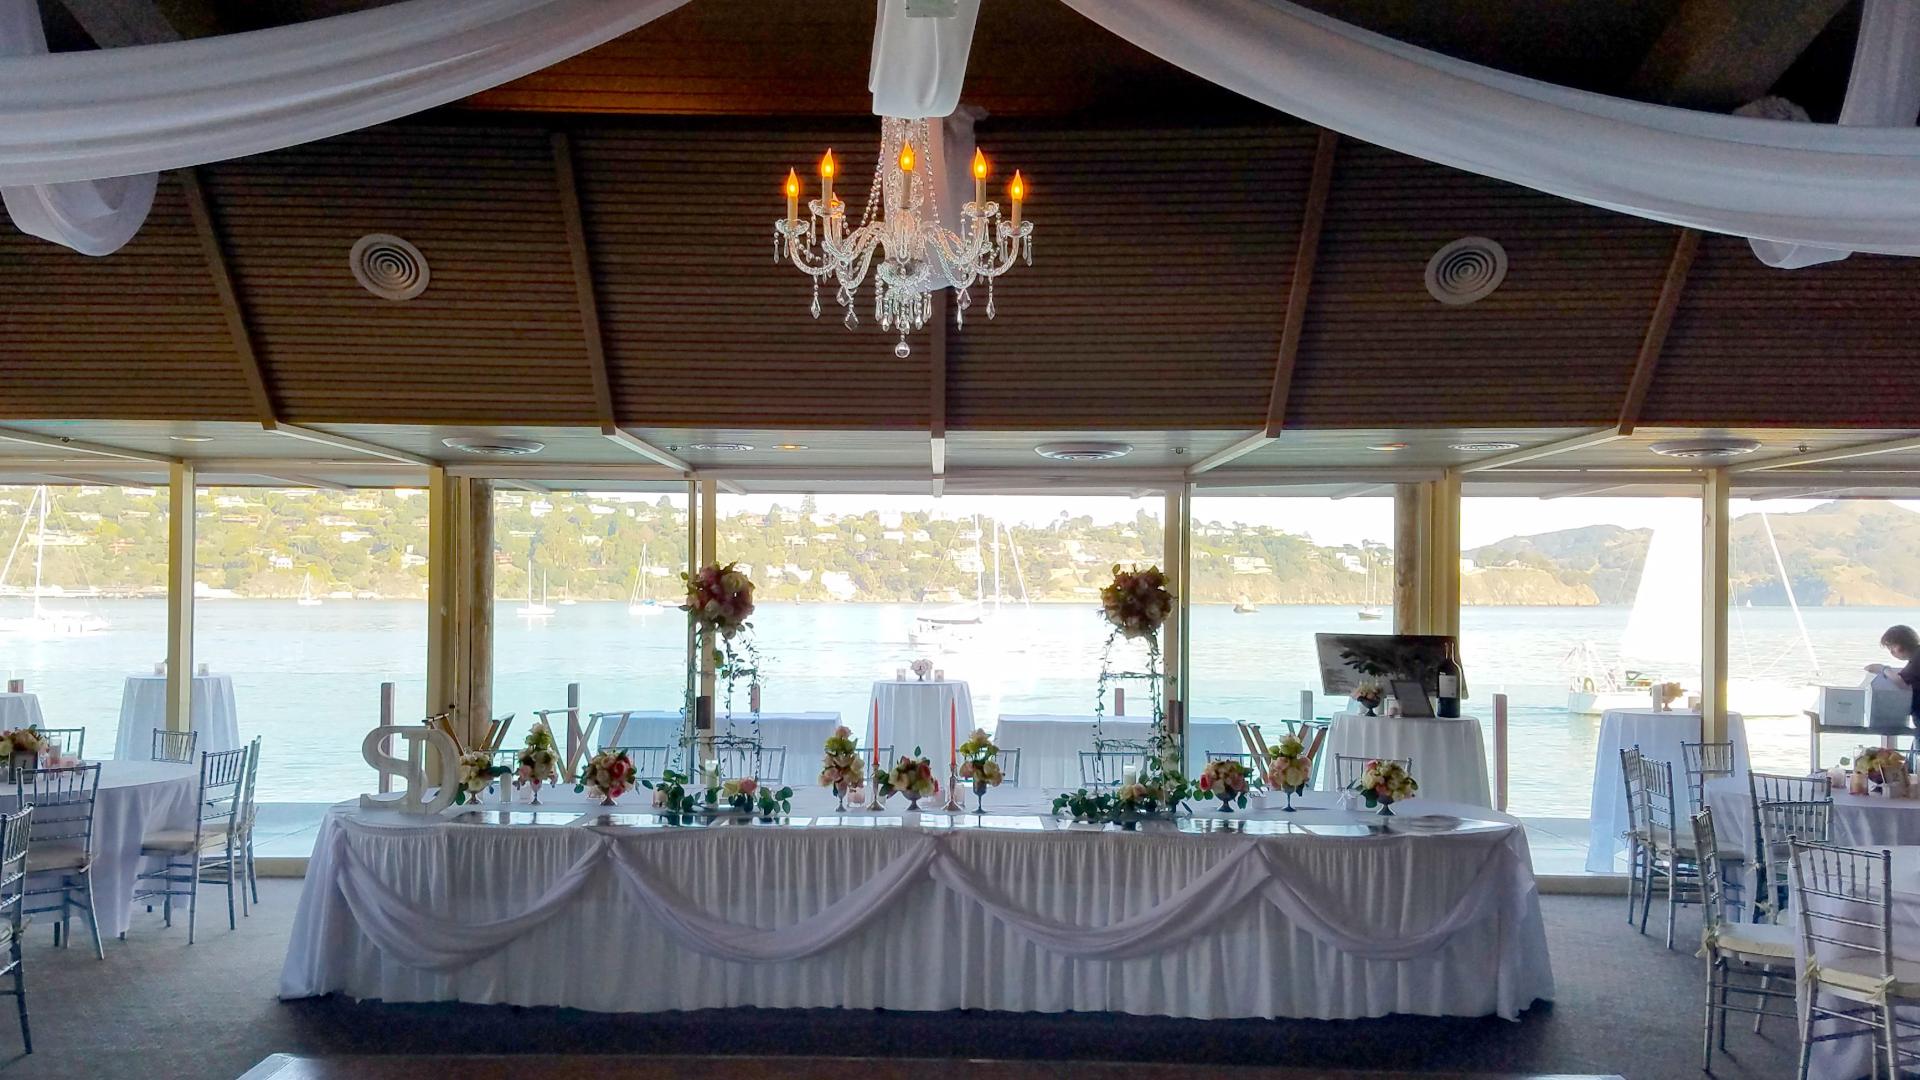 Small Wedding Venues for Rent in San Francisco, CA